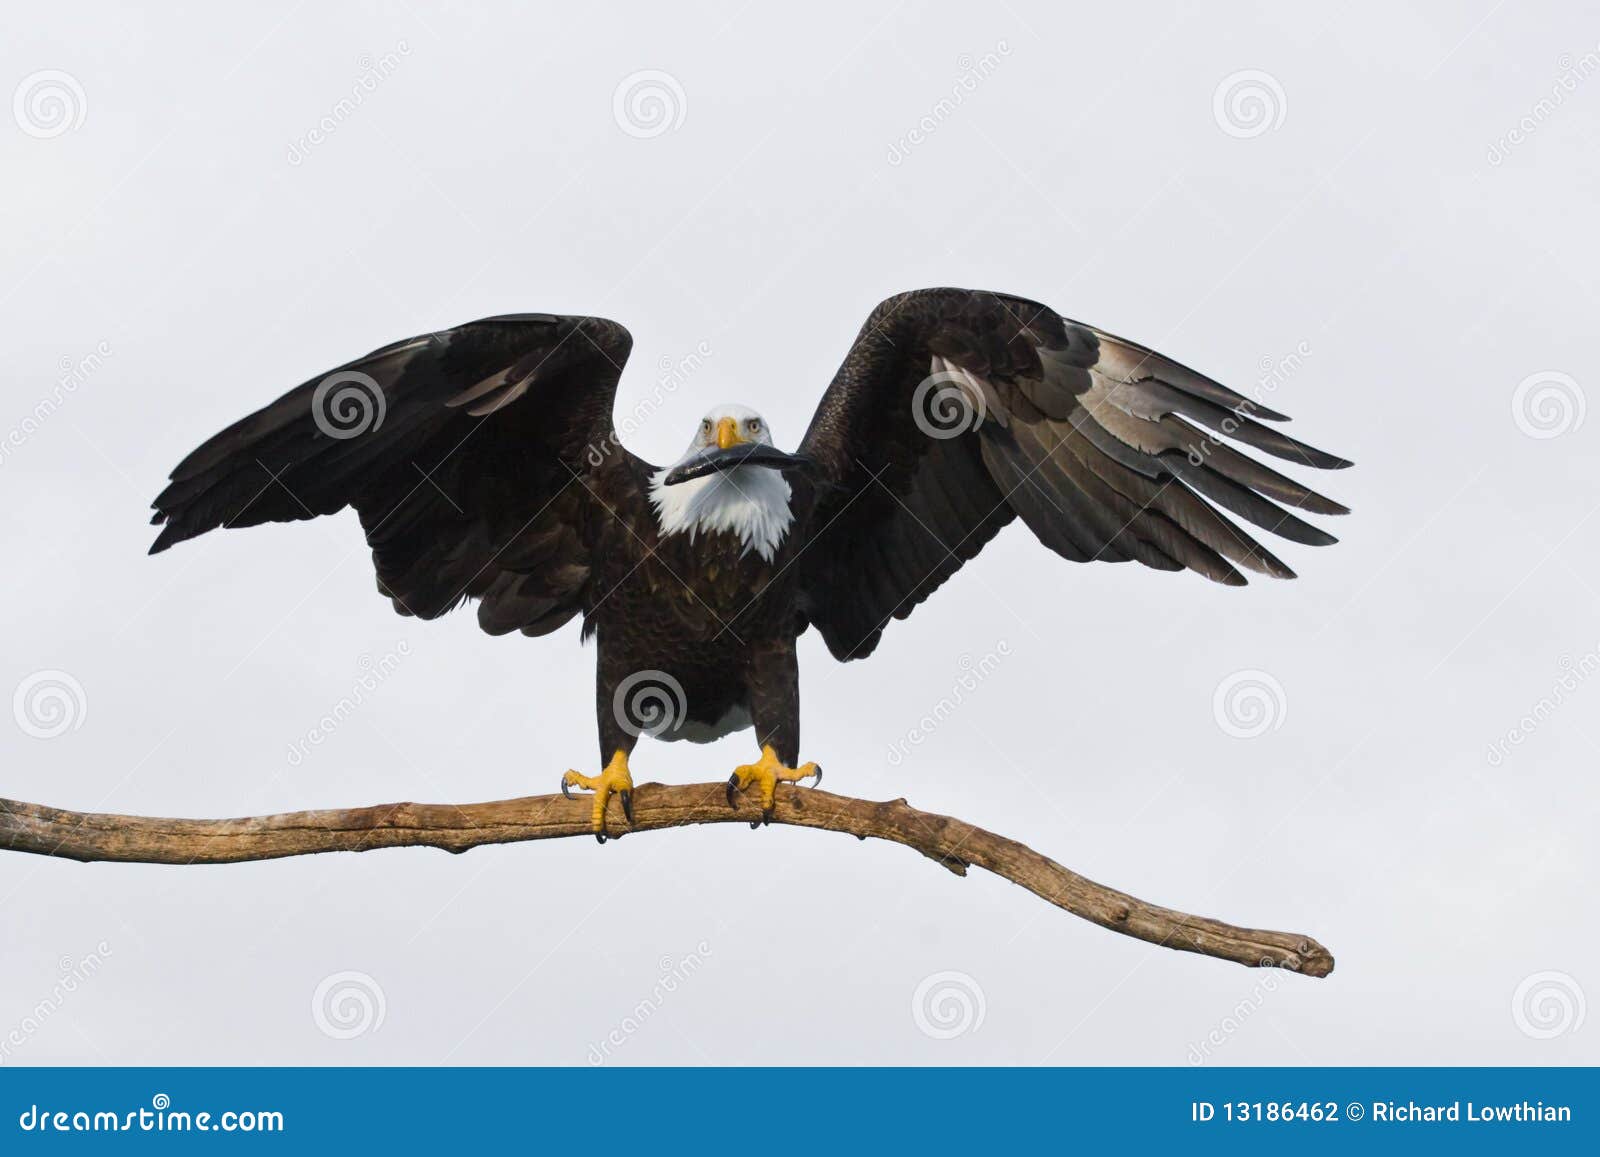 an American bald eagle on a perch with its wings spread. It is holding ...